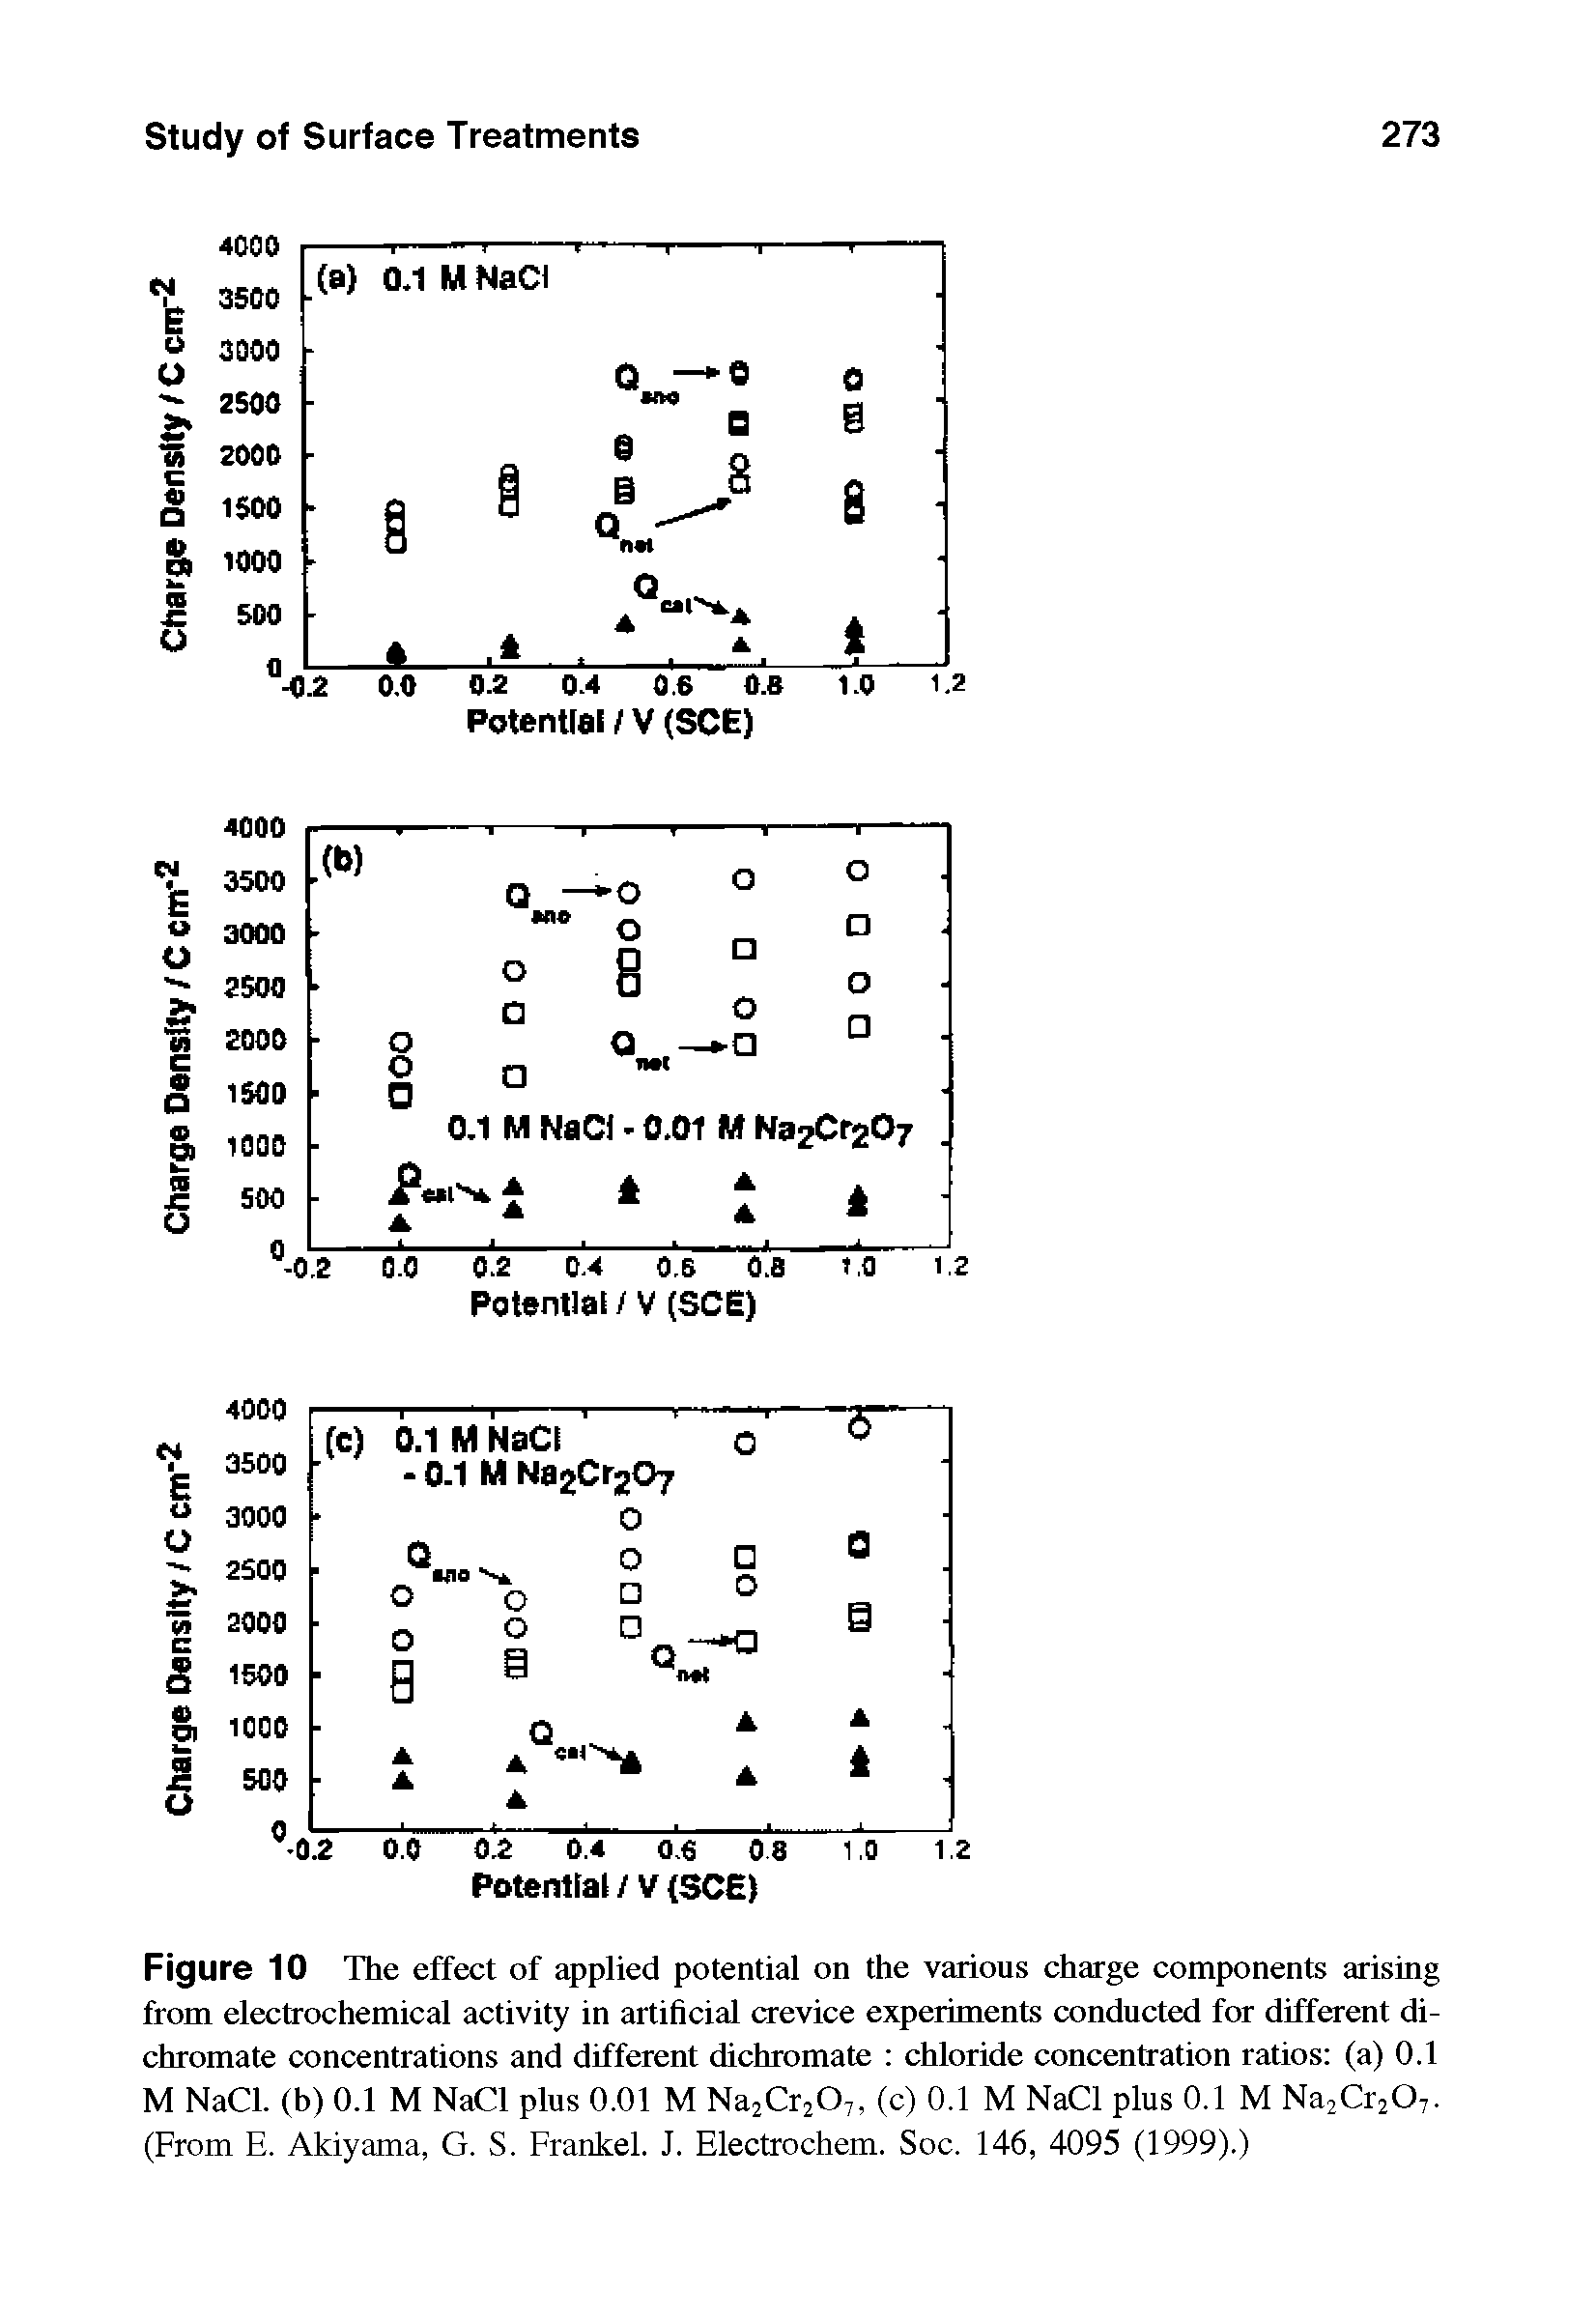 Figure 10 The effect of applied potential on the various charge components arising from electrochemical activity in artificial crevice experiments conducted for different dichromate concentrations and different dichromate chloride concentration ratios (a) 0.1 M NaCl. (b) 0.1 M NaCl plus 0.01 M Na2Cr207, (c) 0.1 M NaCl plus 0.1 M Na2Cr207. (From E. Akiyama, G. S. Frankel. J. Electrochem. Soc. 146, 4095 (1999).)...